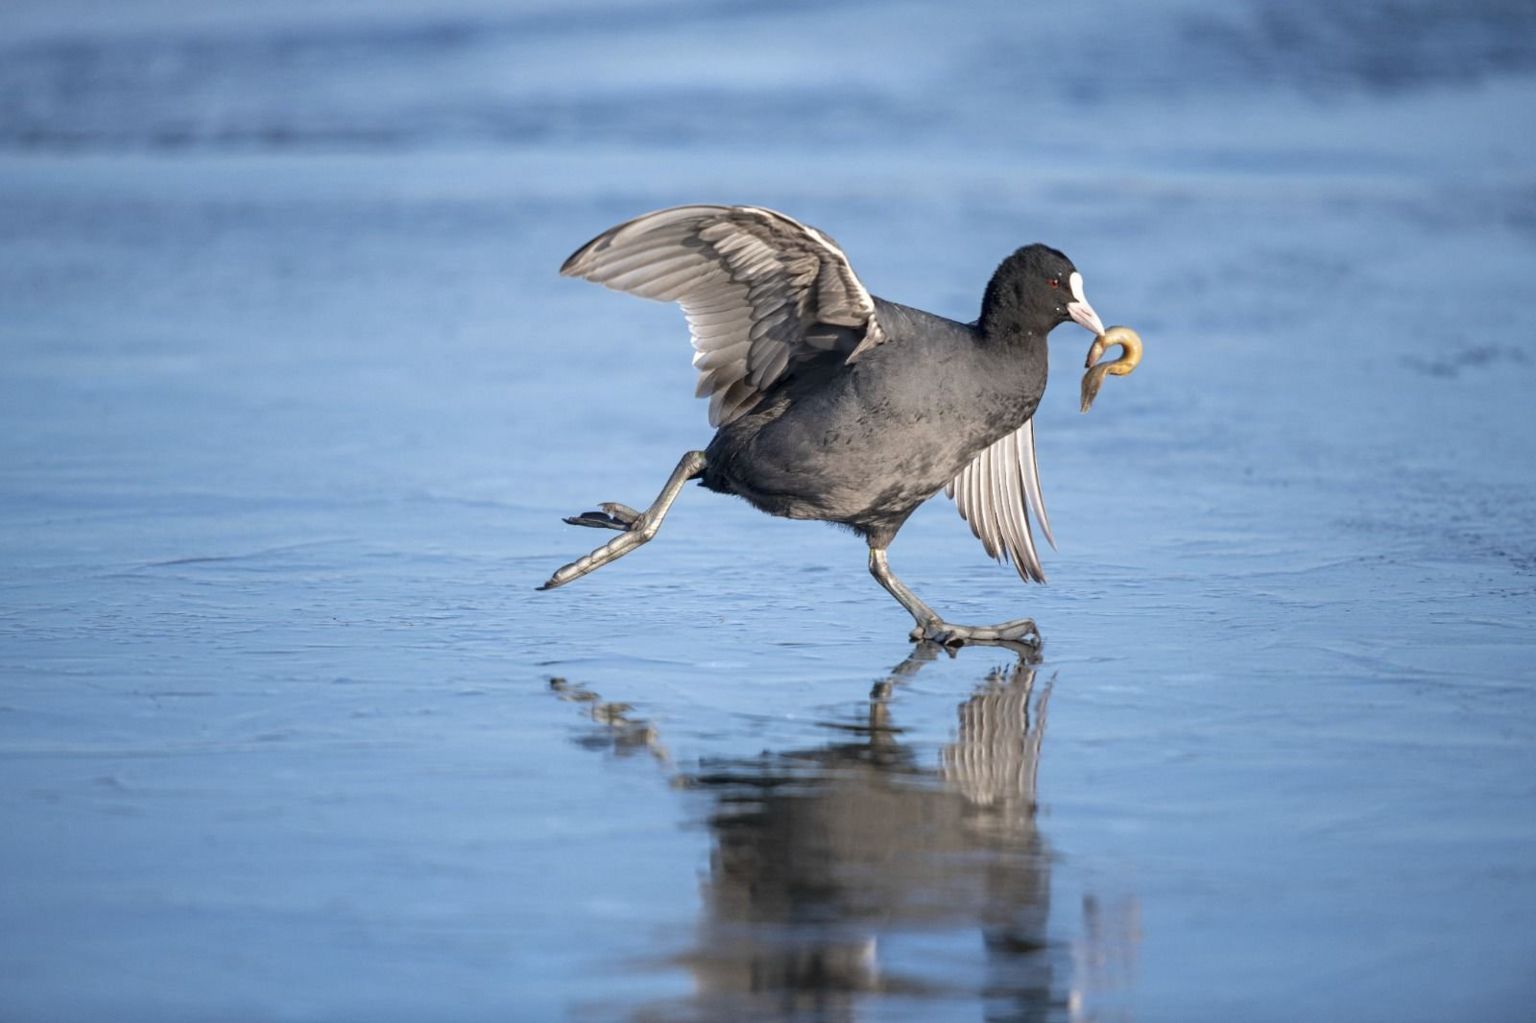 A coot struggles to stay upright on ice while holding a wriggling loach